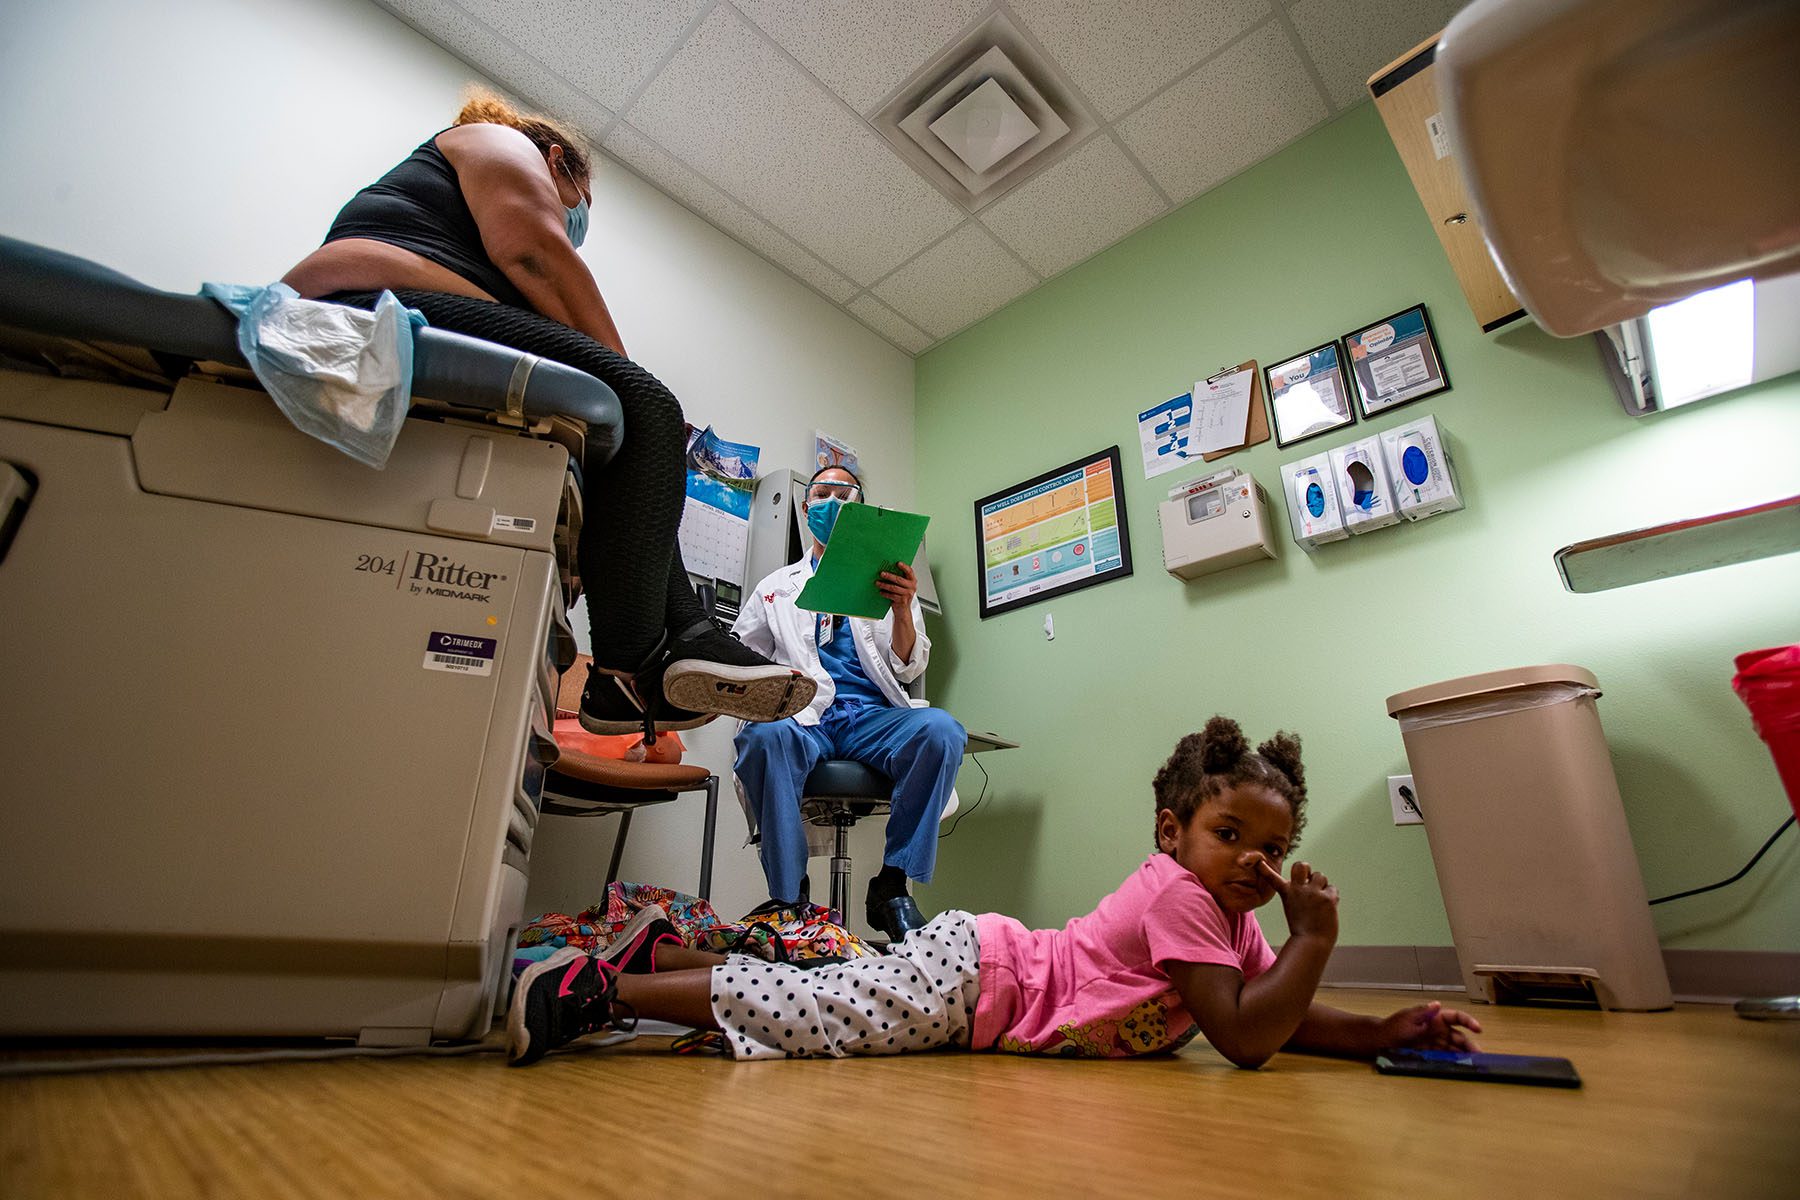 A doctor discusses the procedure for a medication abortion with a patient while the patient's daughter sits on the floor and plays.